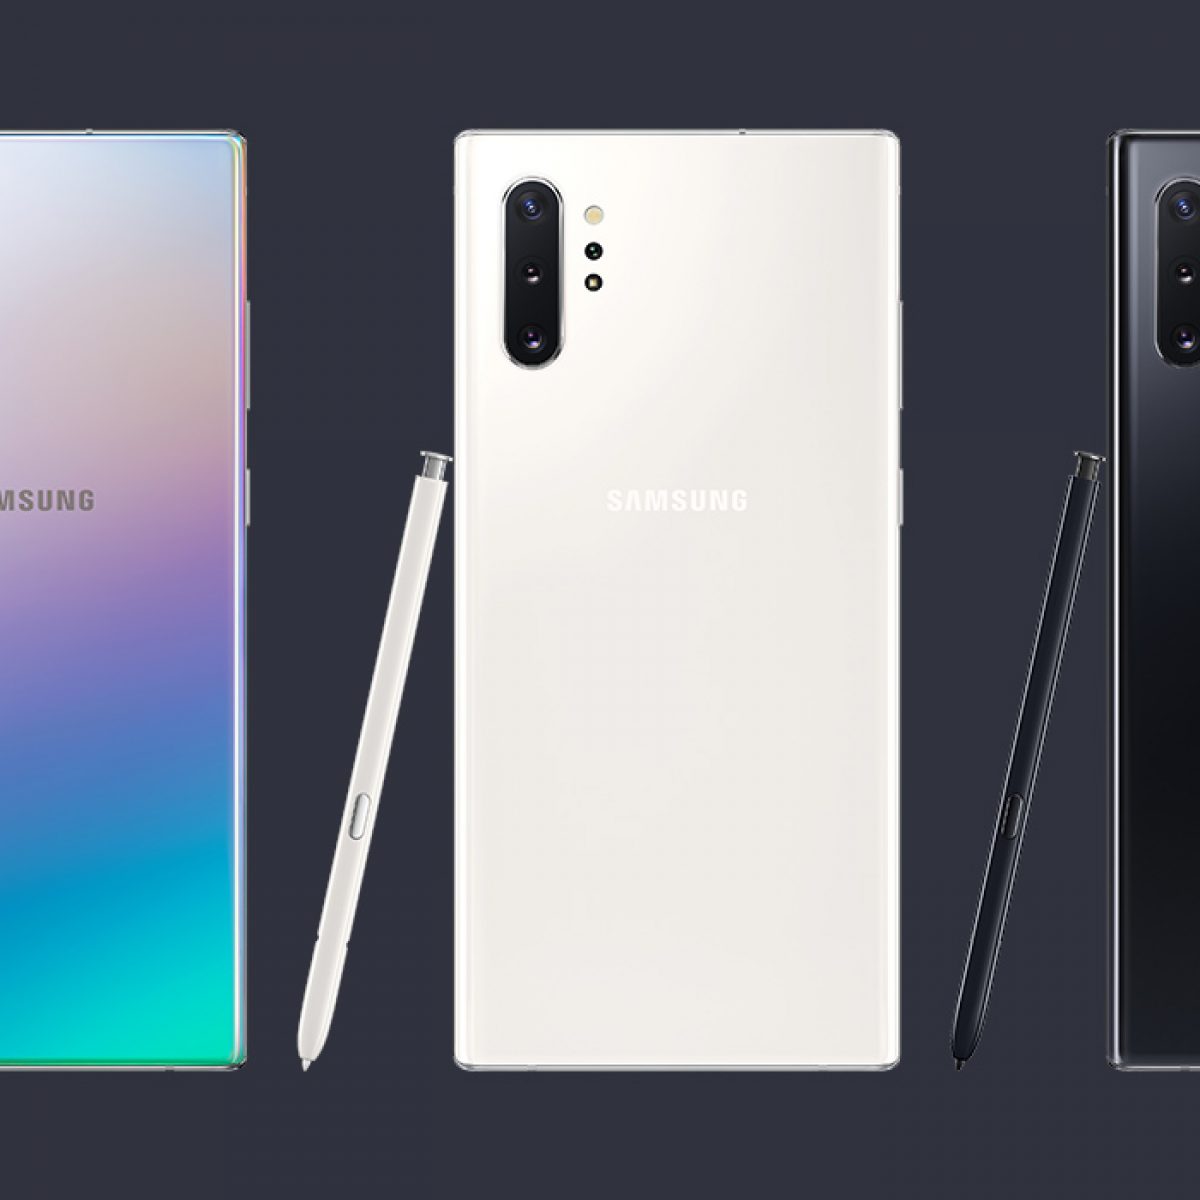 Galaxy Note 10 Plus Prices, Still a Good Buy - Swappa